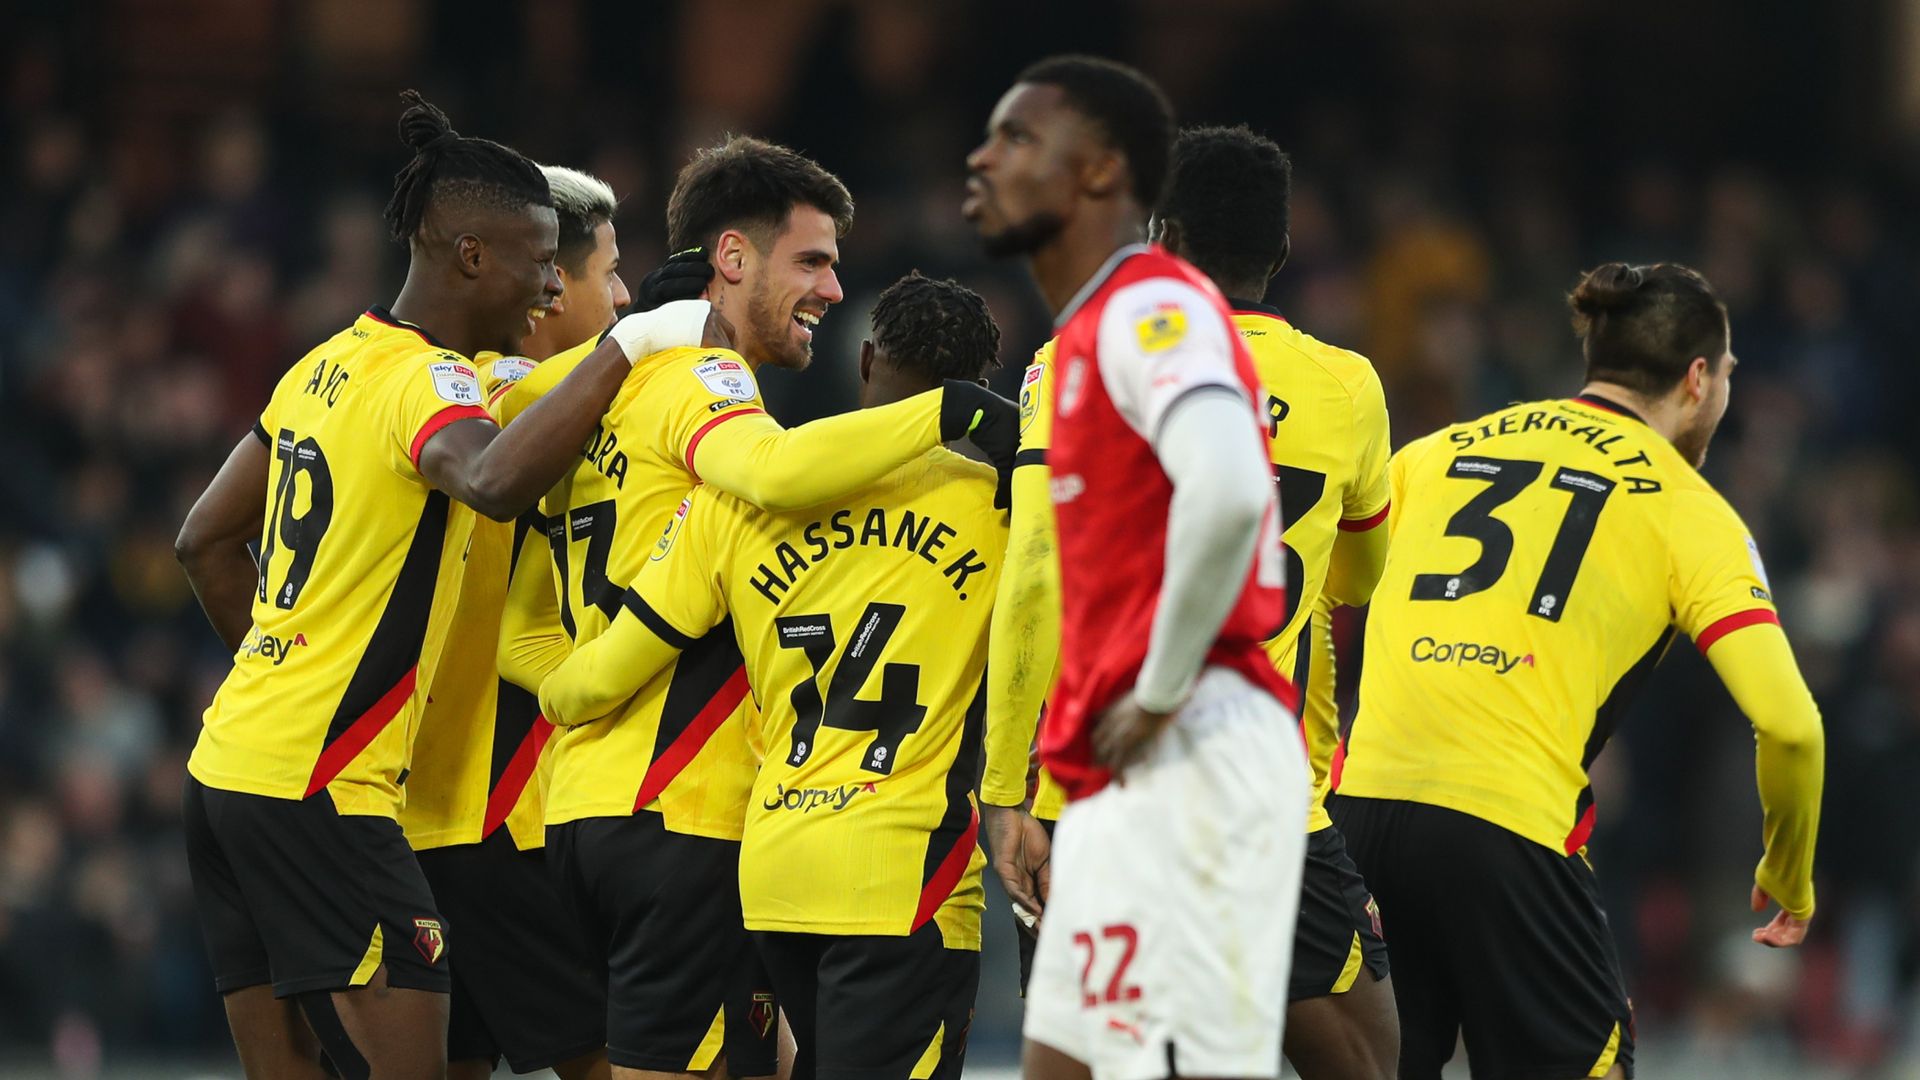 Watford earn point against Rotherham